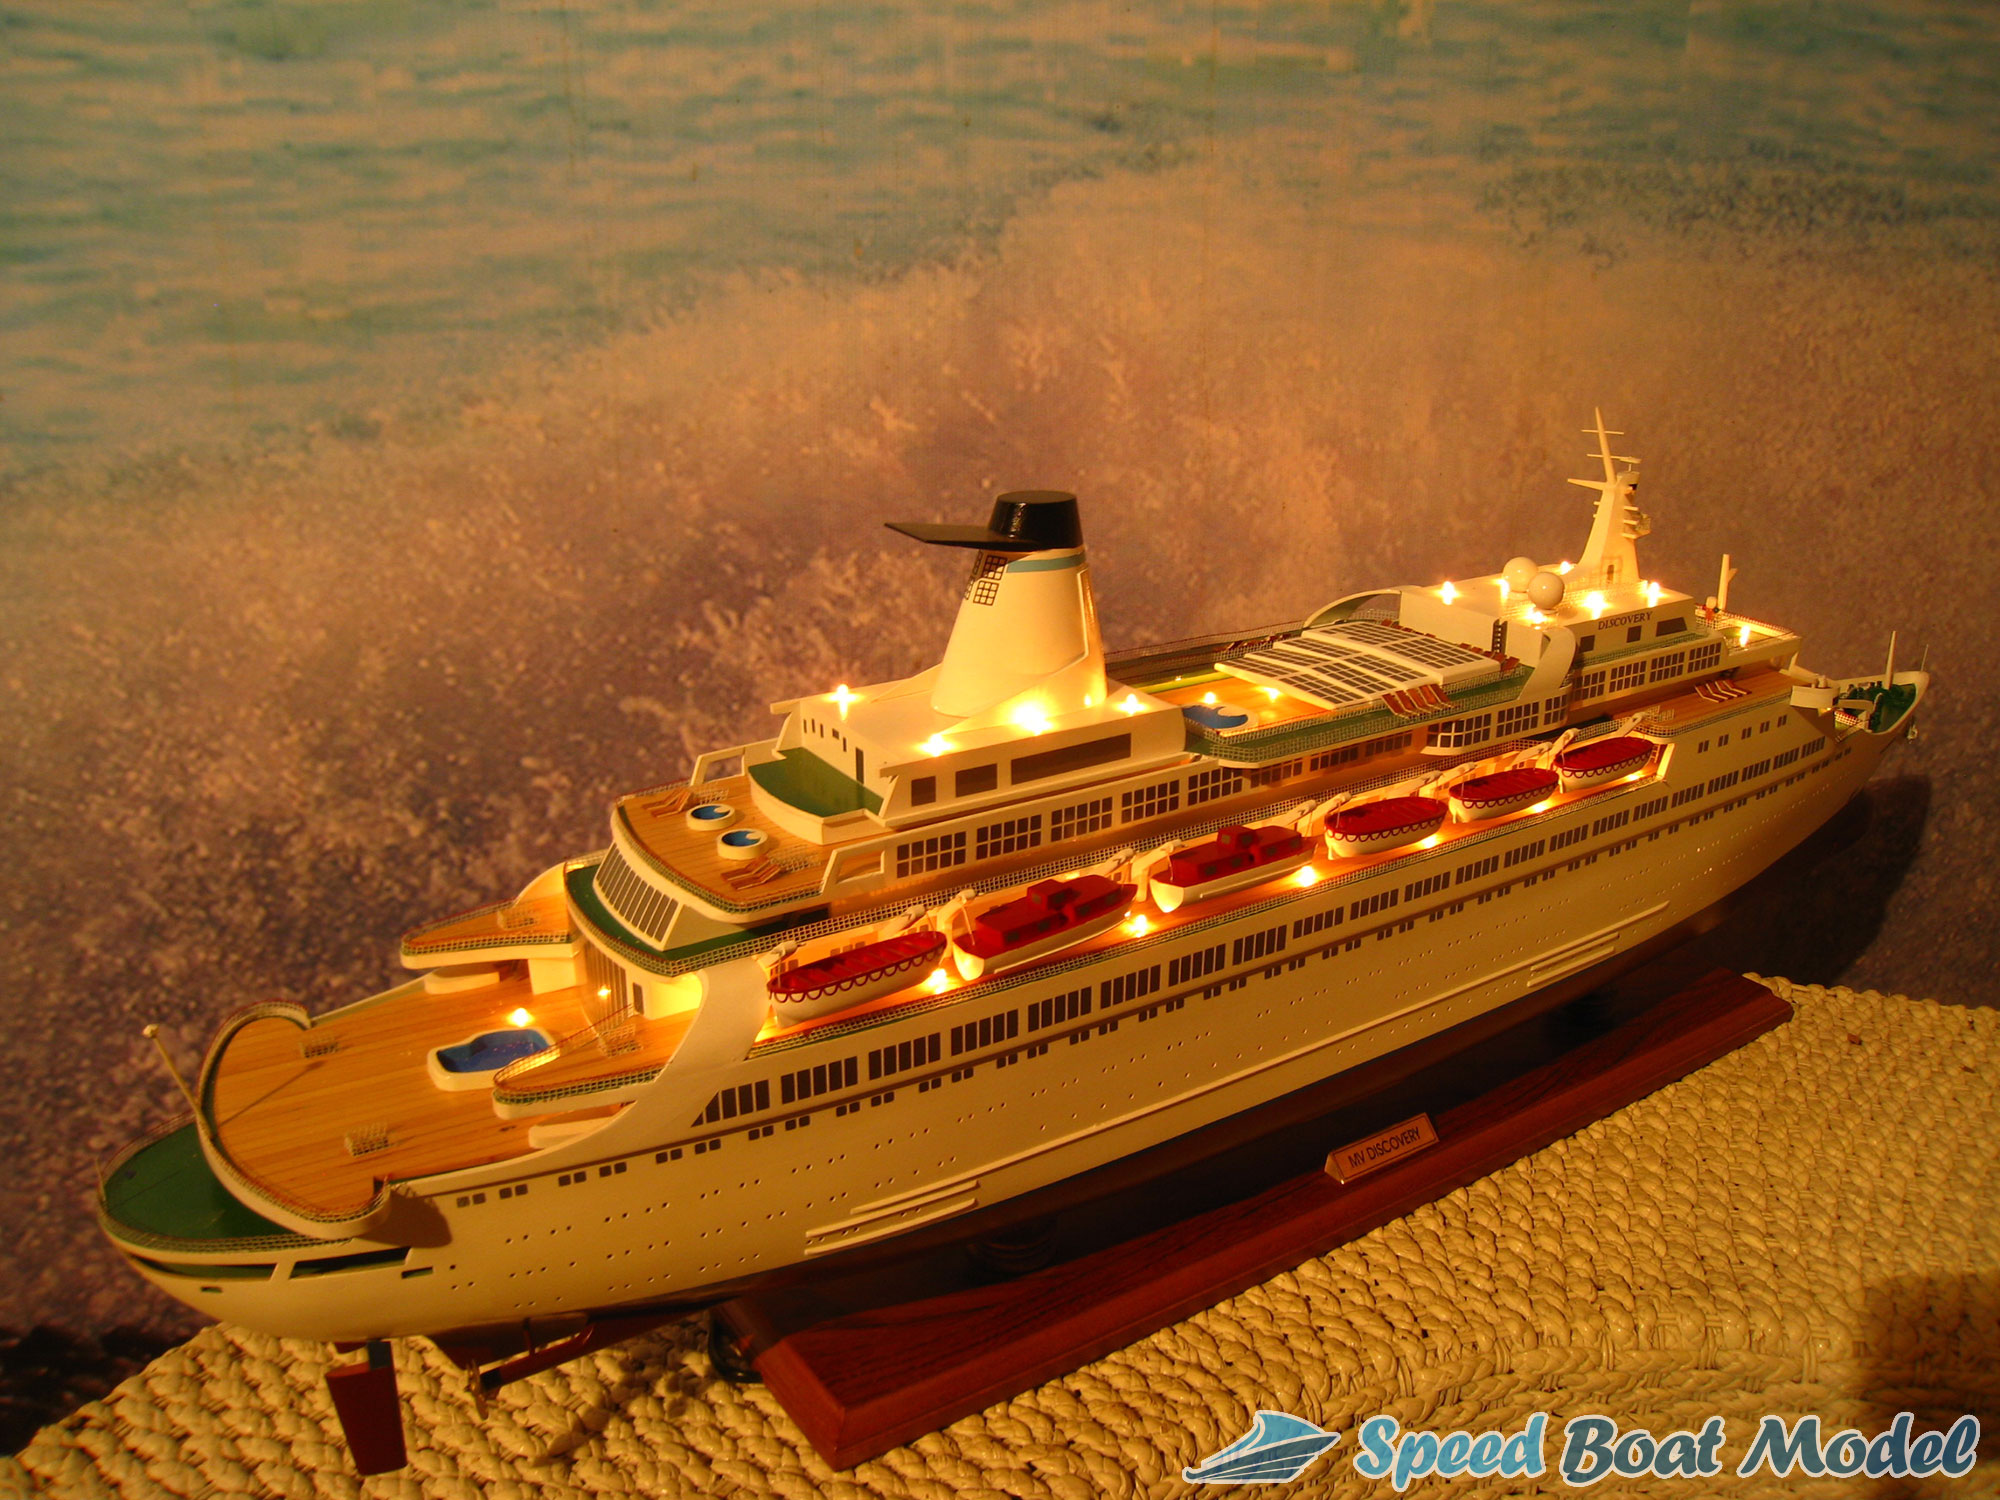 Mv Discovery Boat Model With Light 39.3"